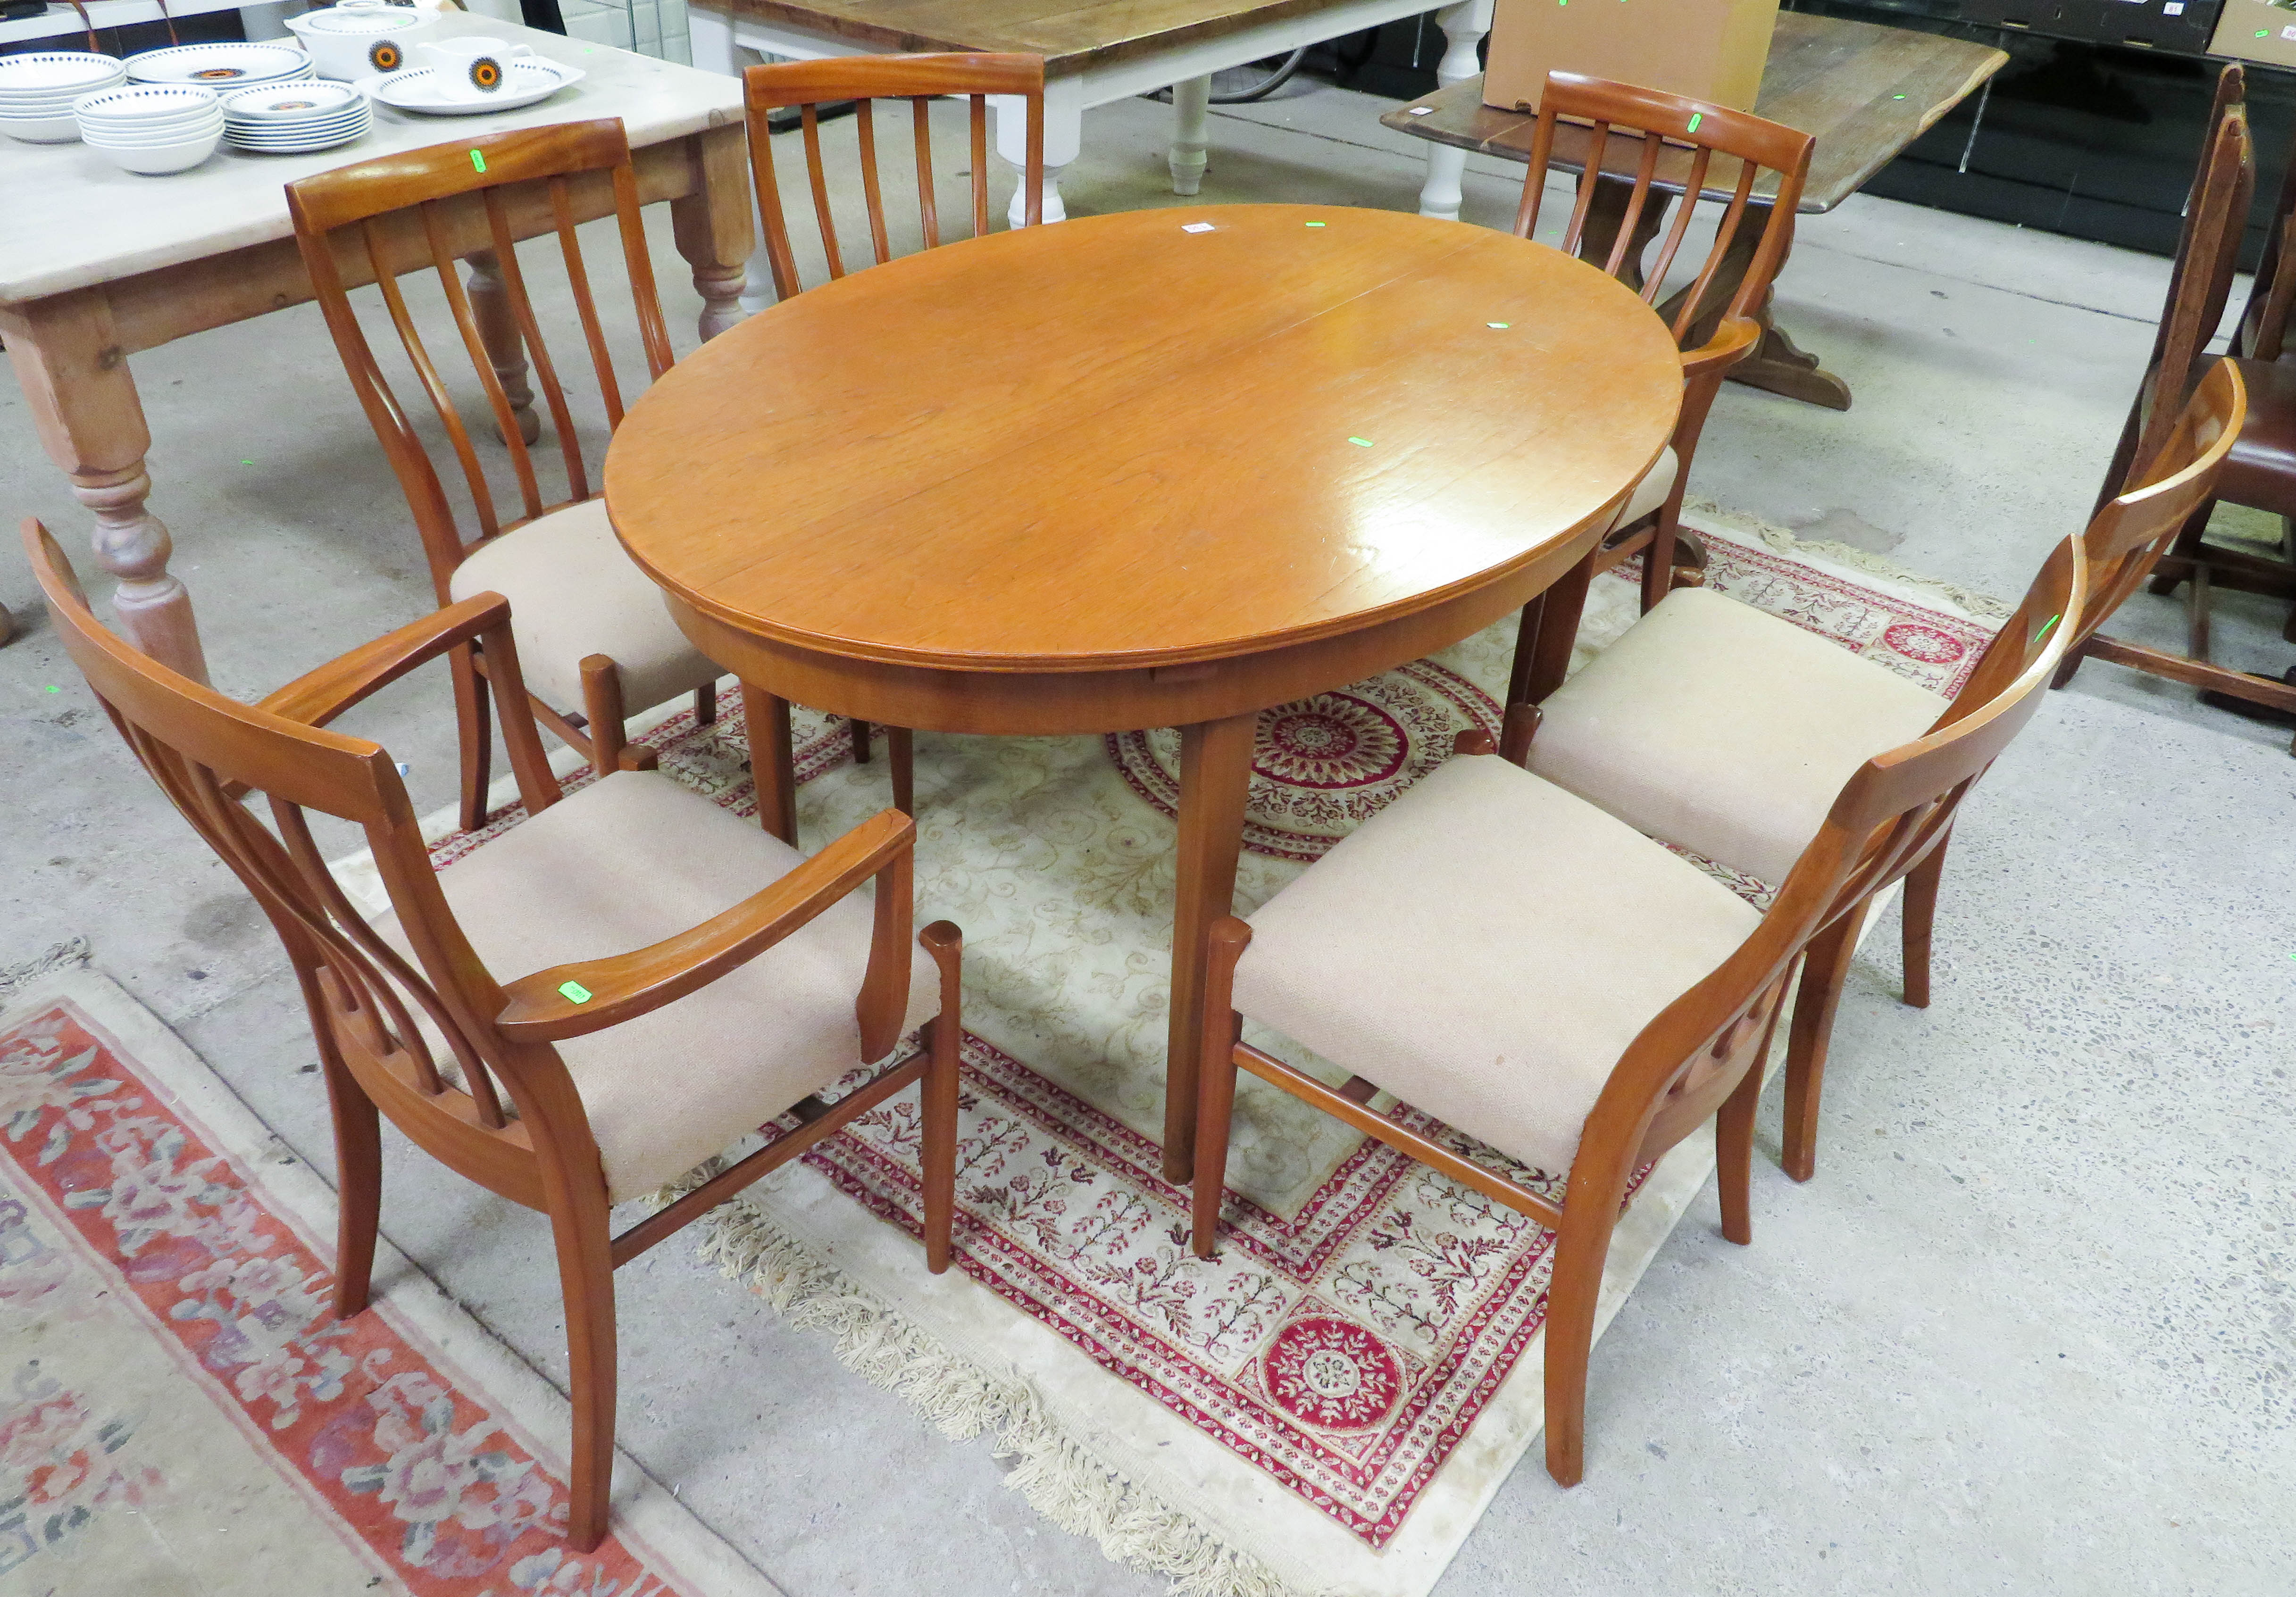 1970s Oval Table with 6 Chairs